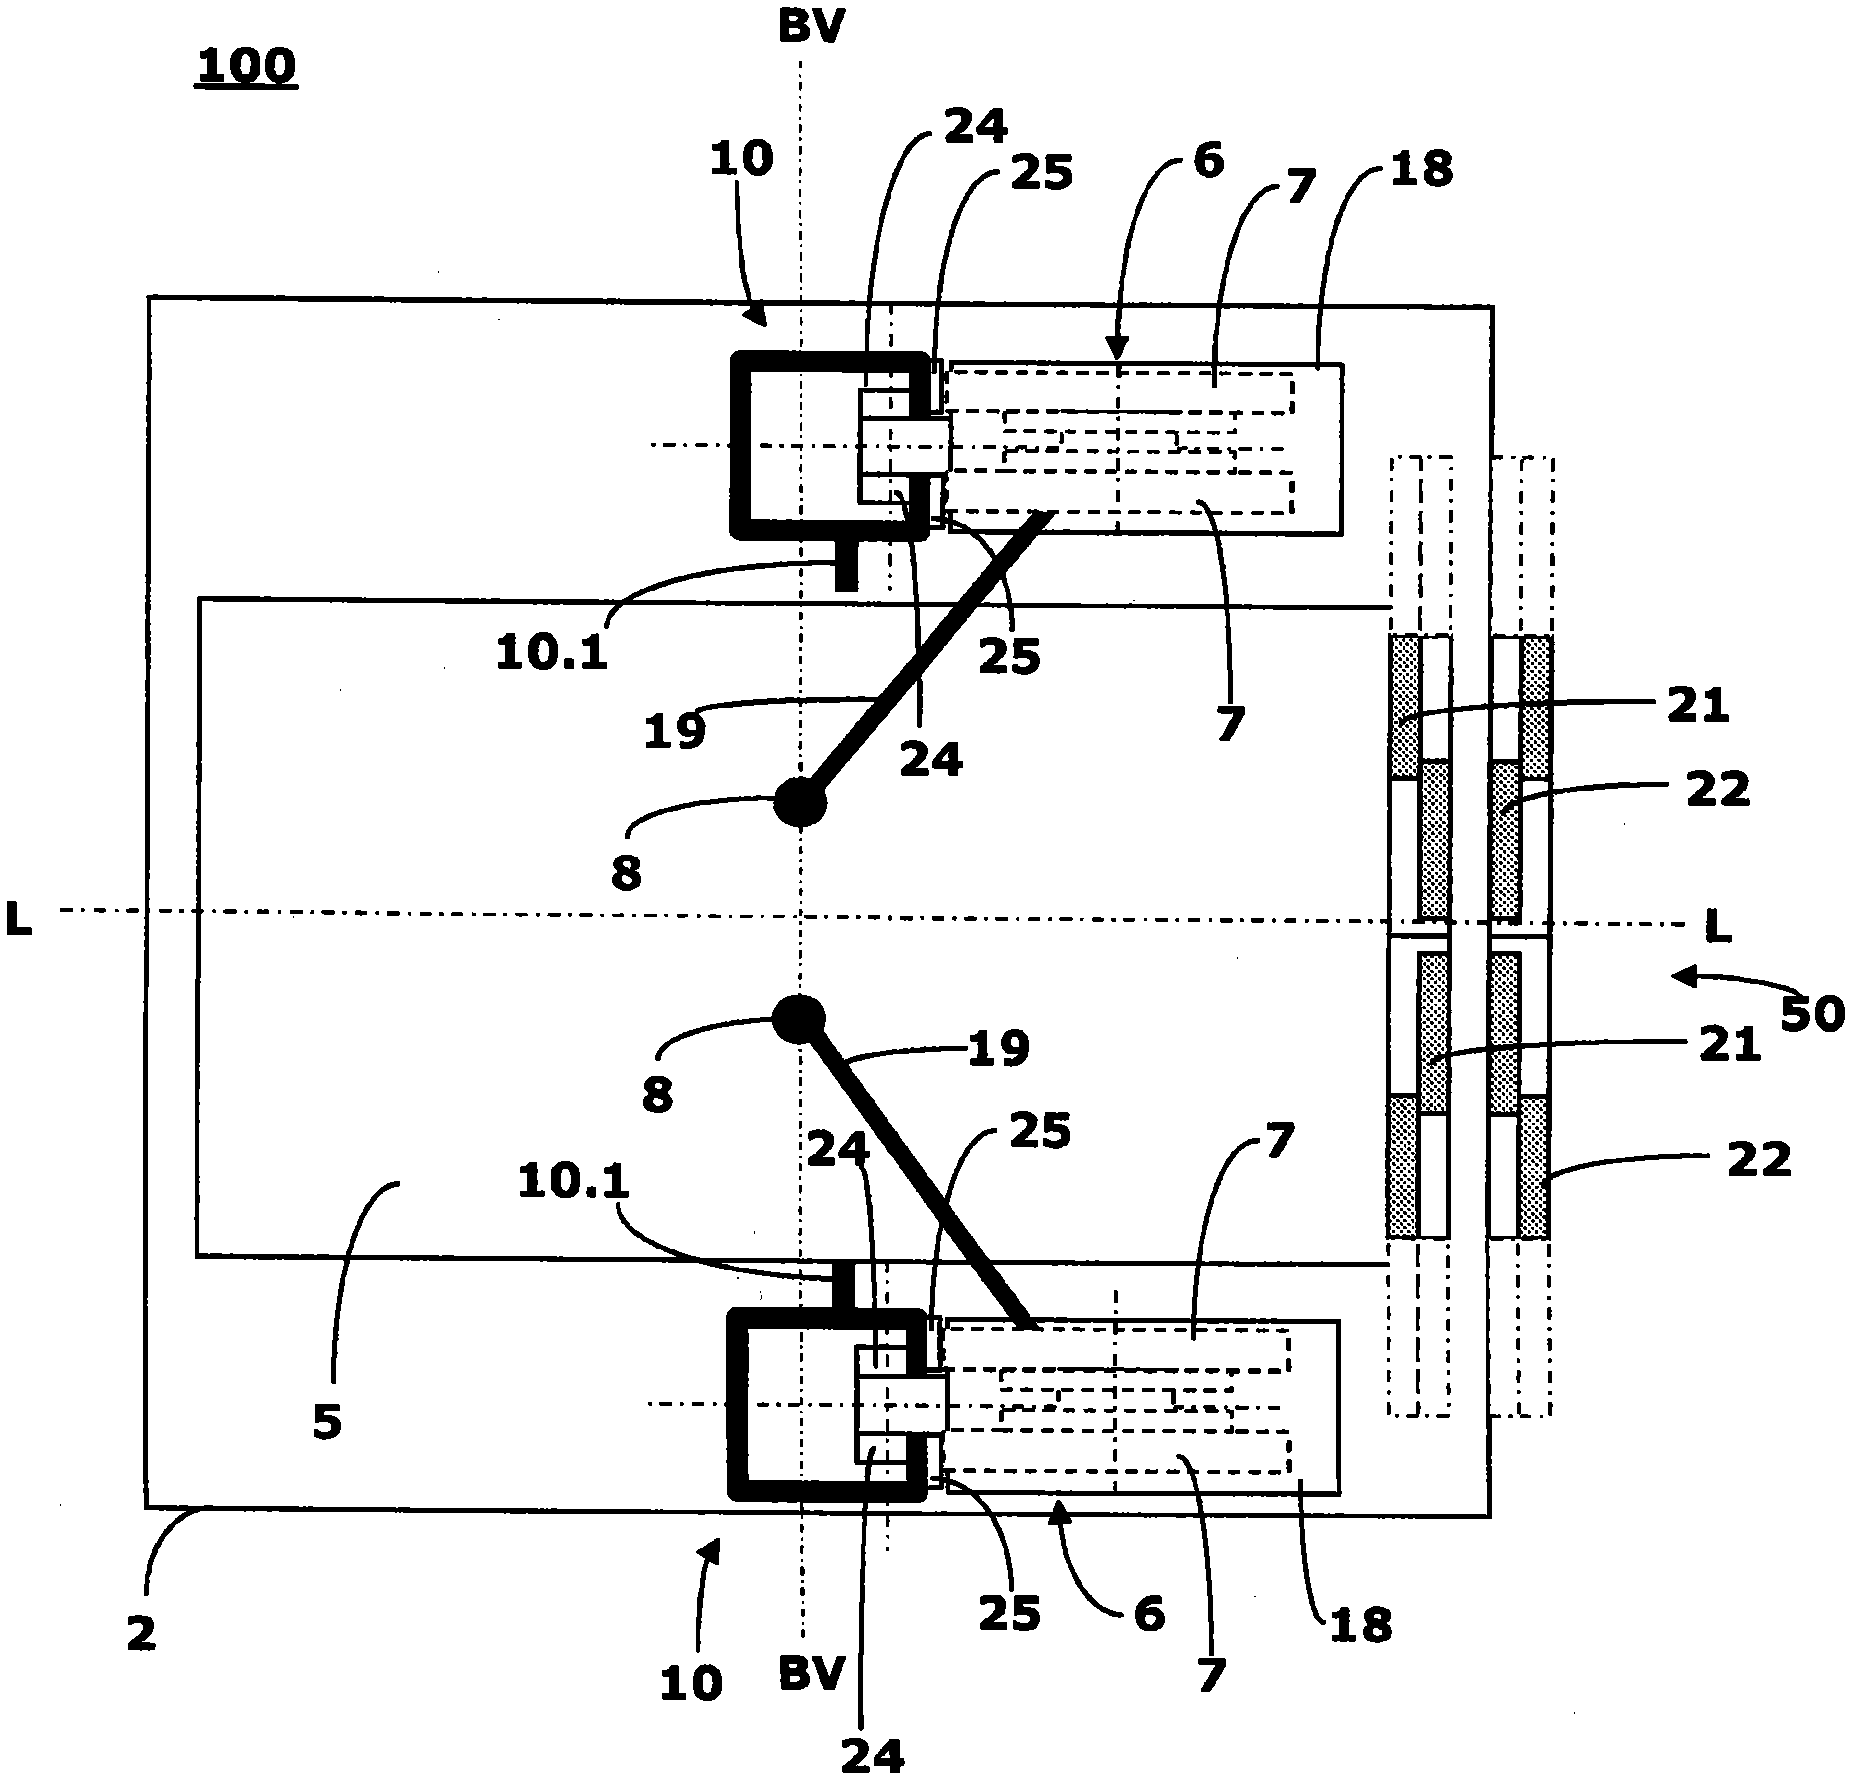 Elevator system with automotive counterweight